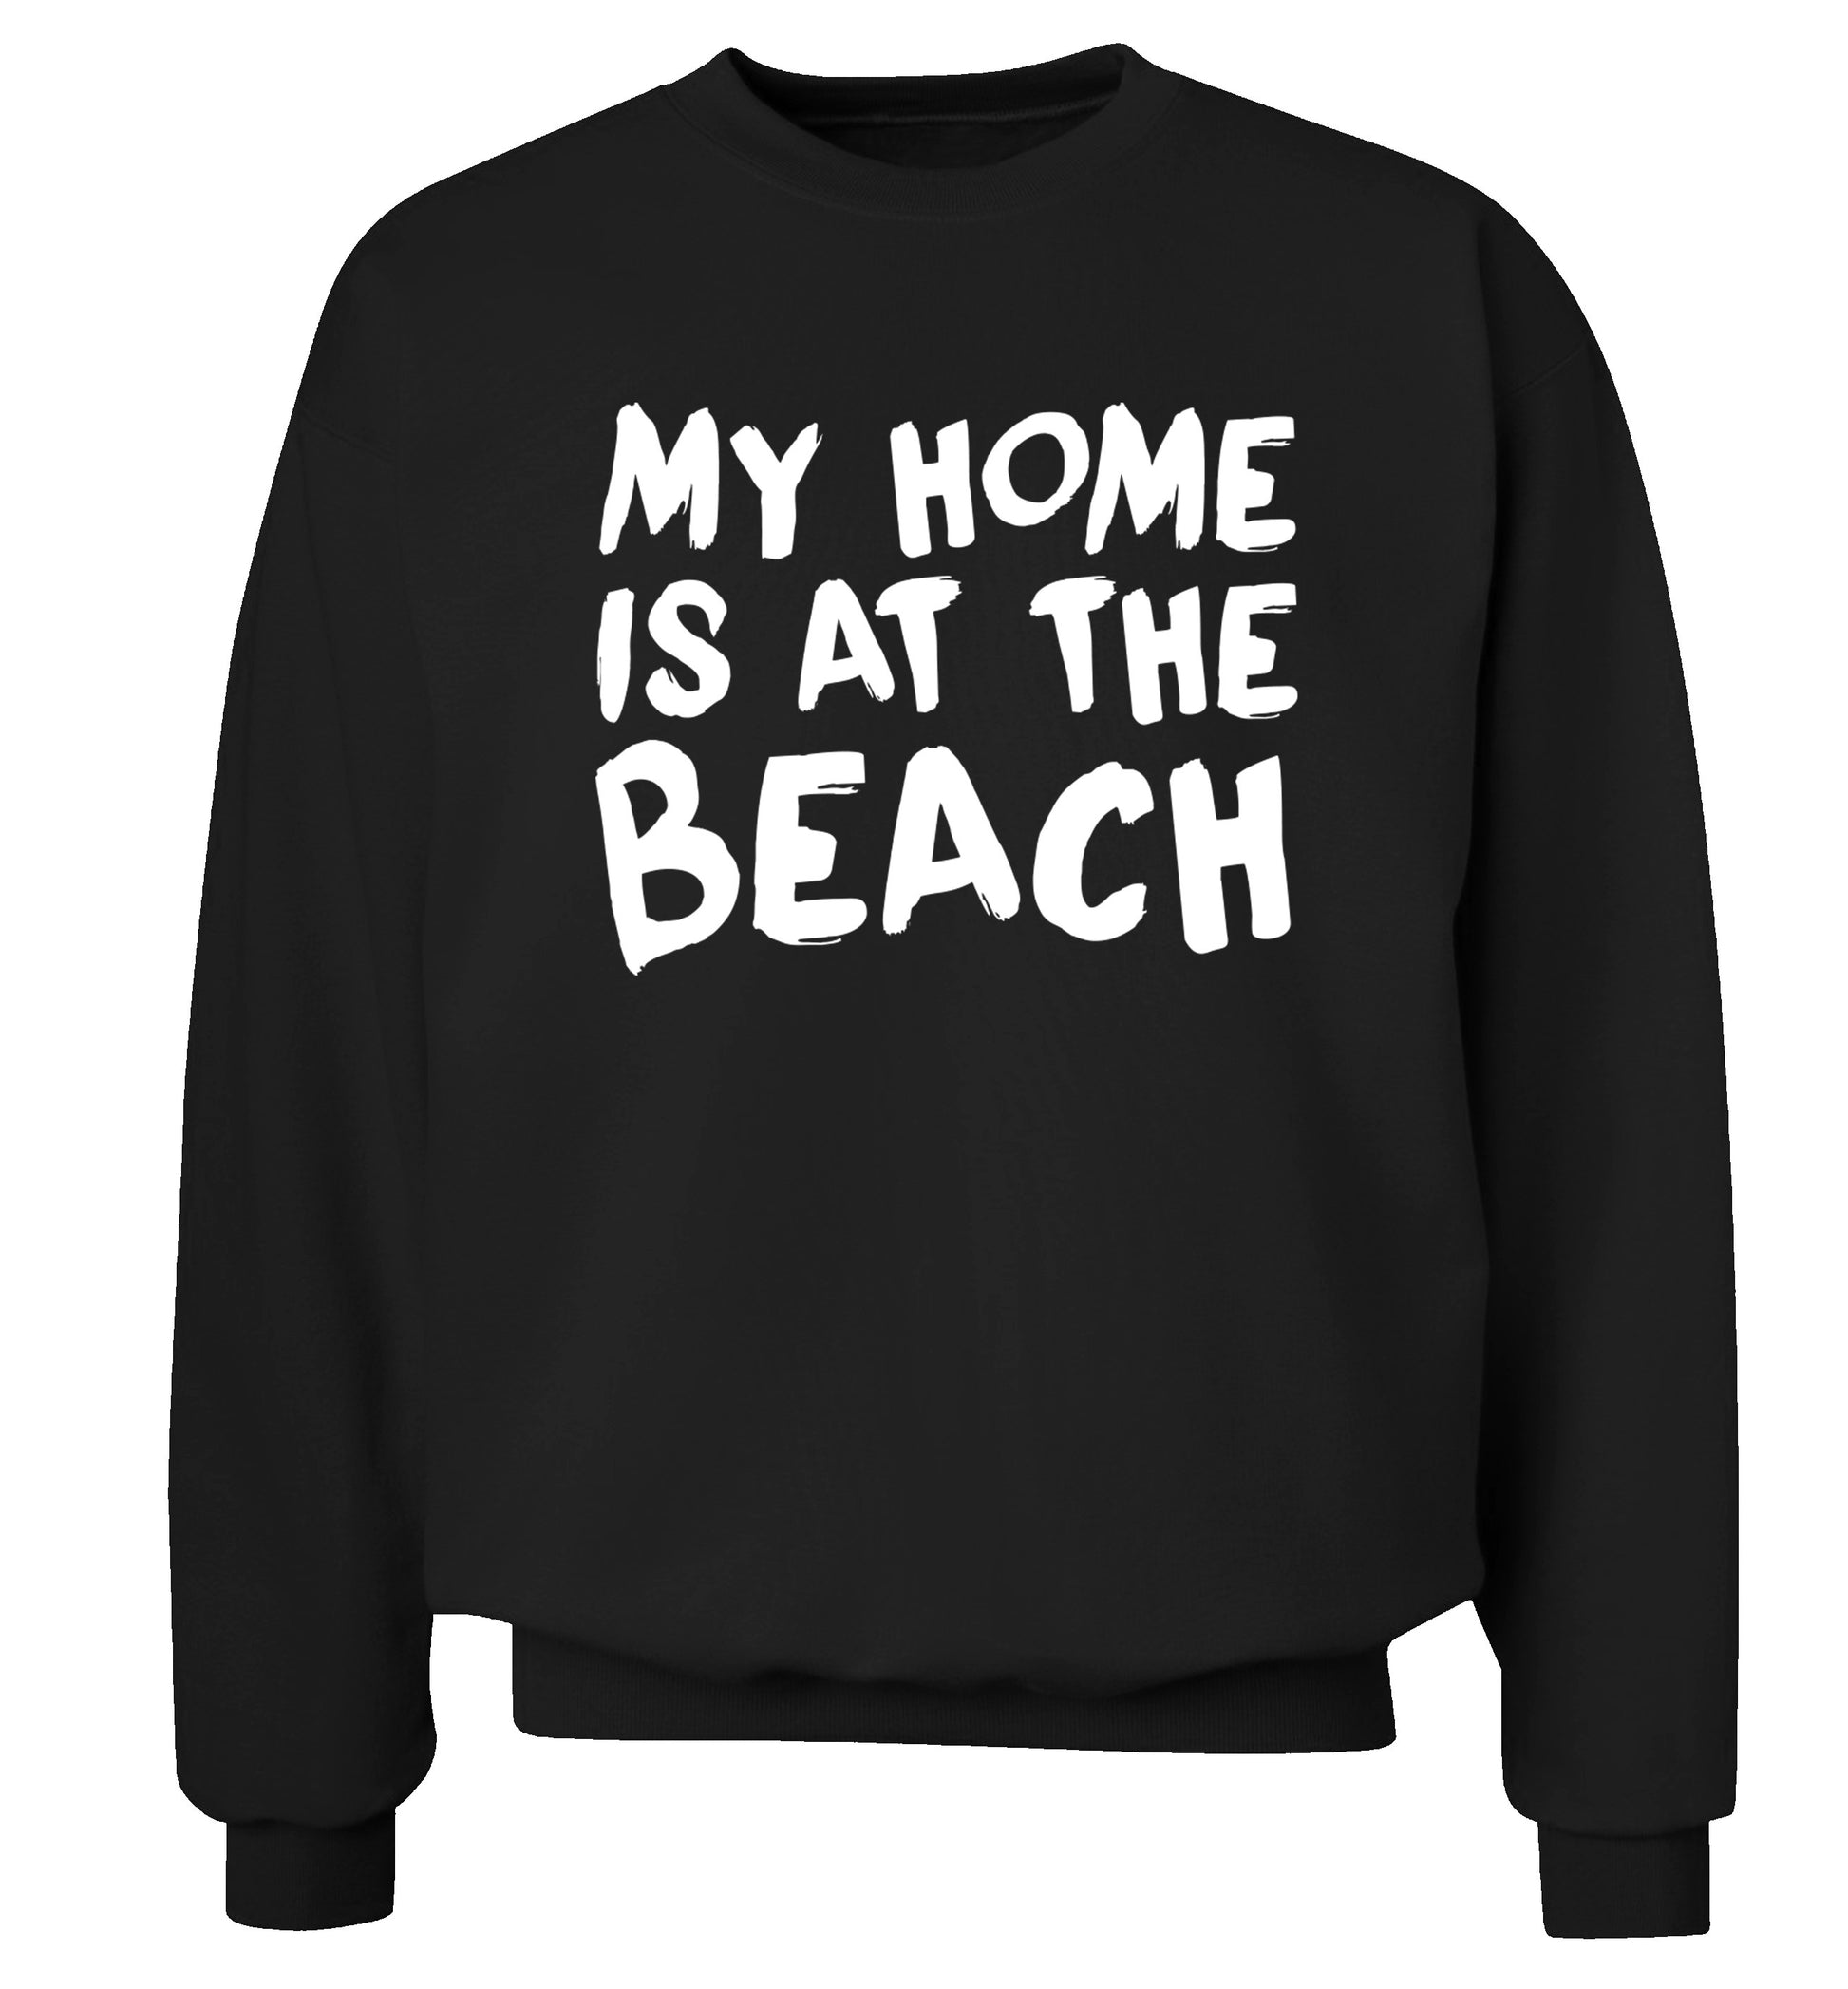 My home is at the beach Adult's unisex black Sweater 2XL